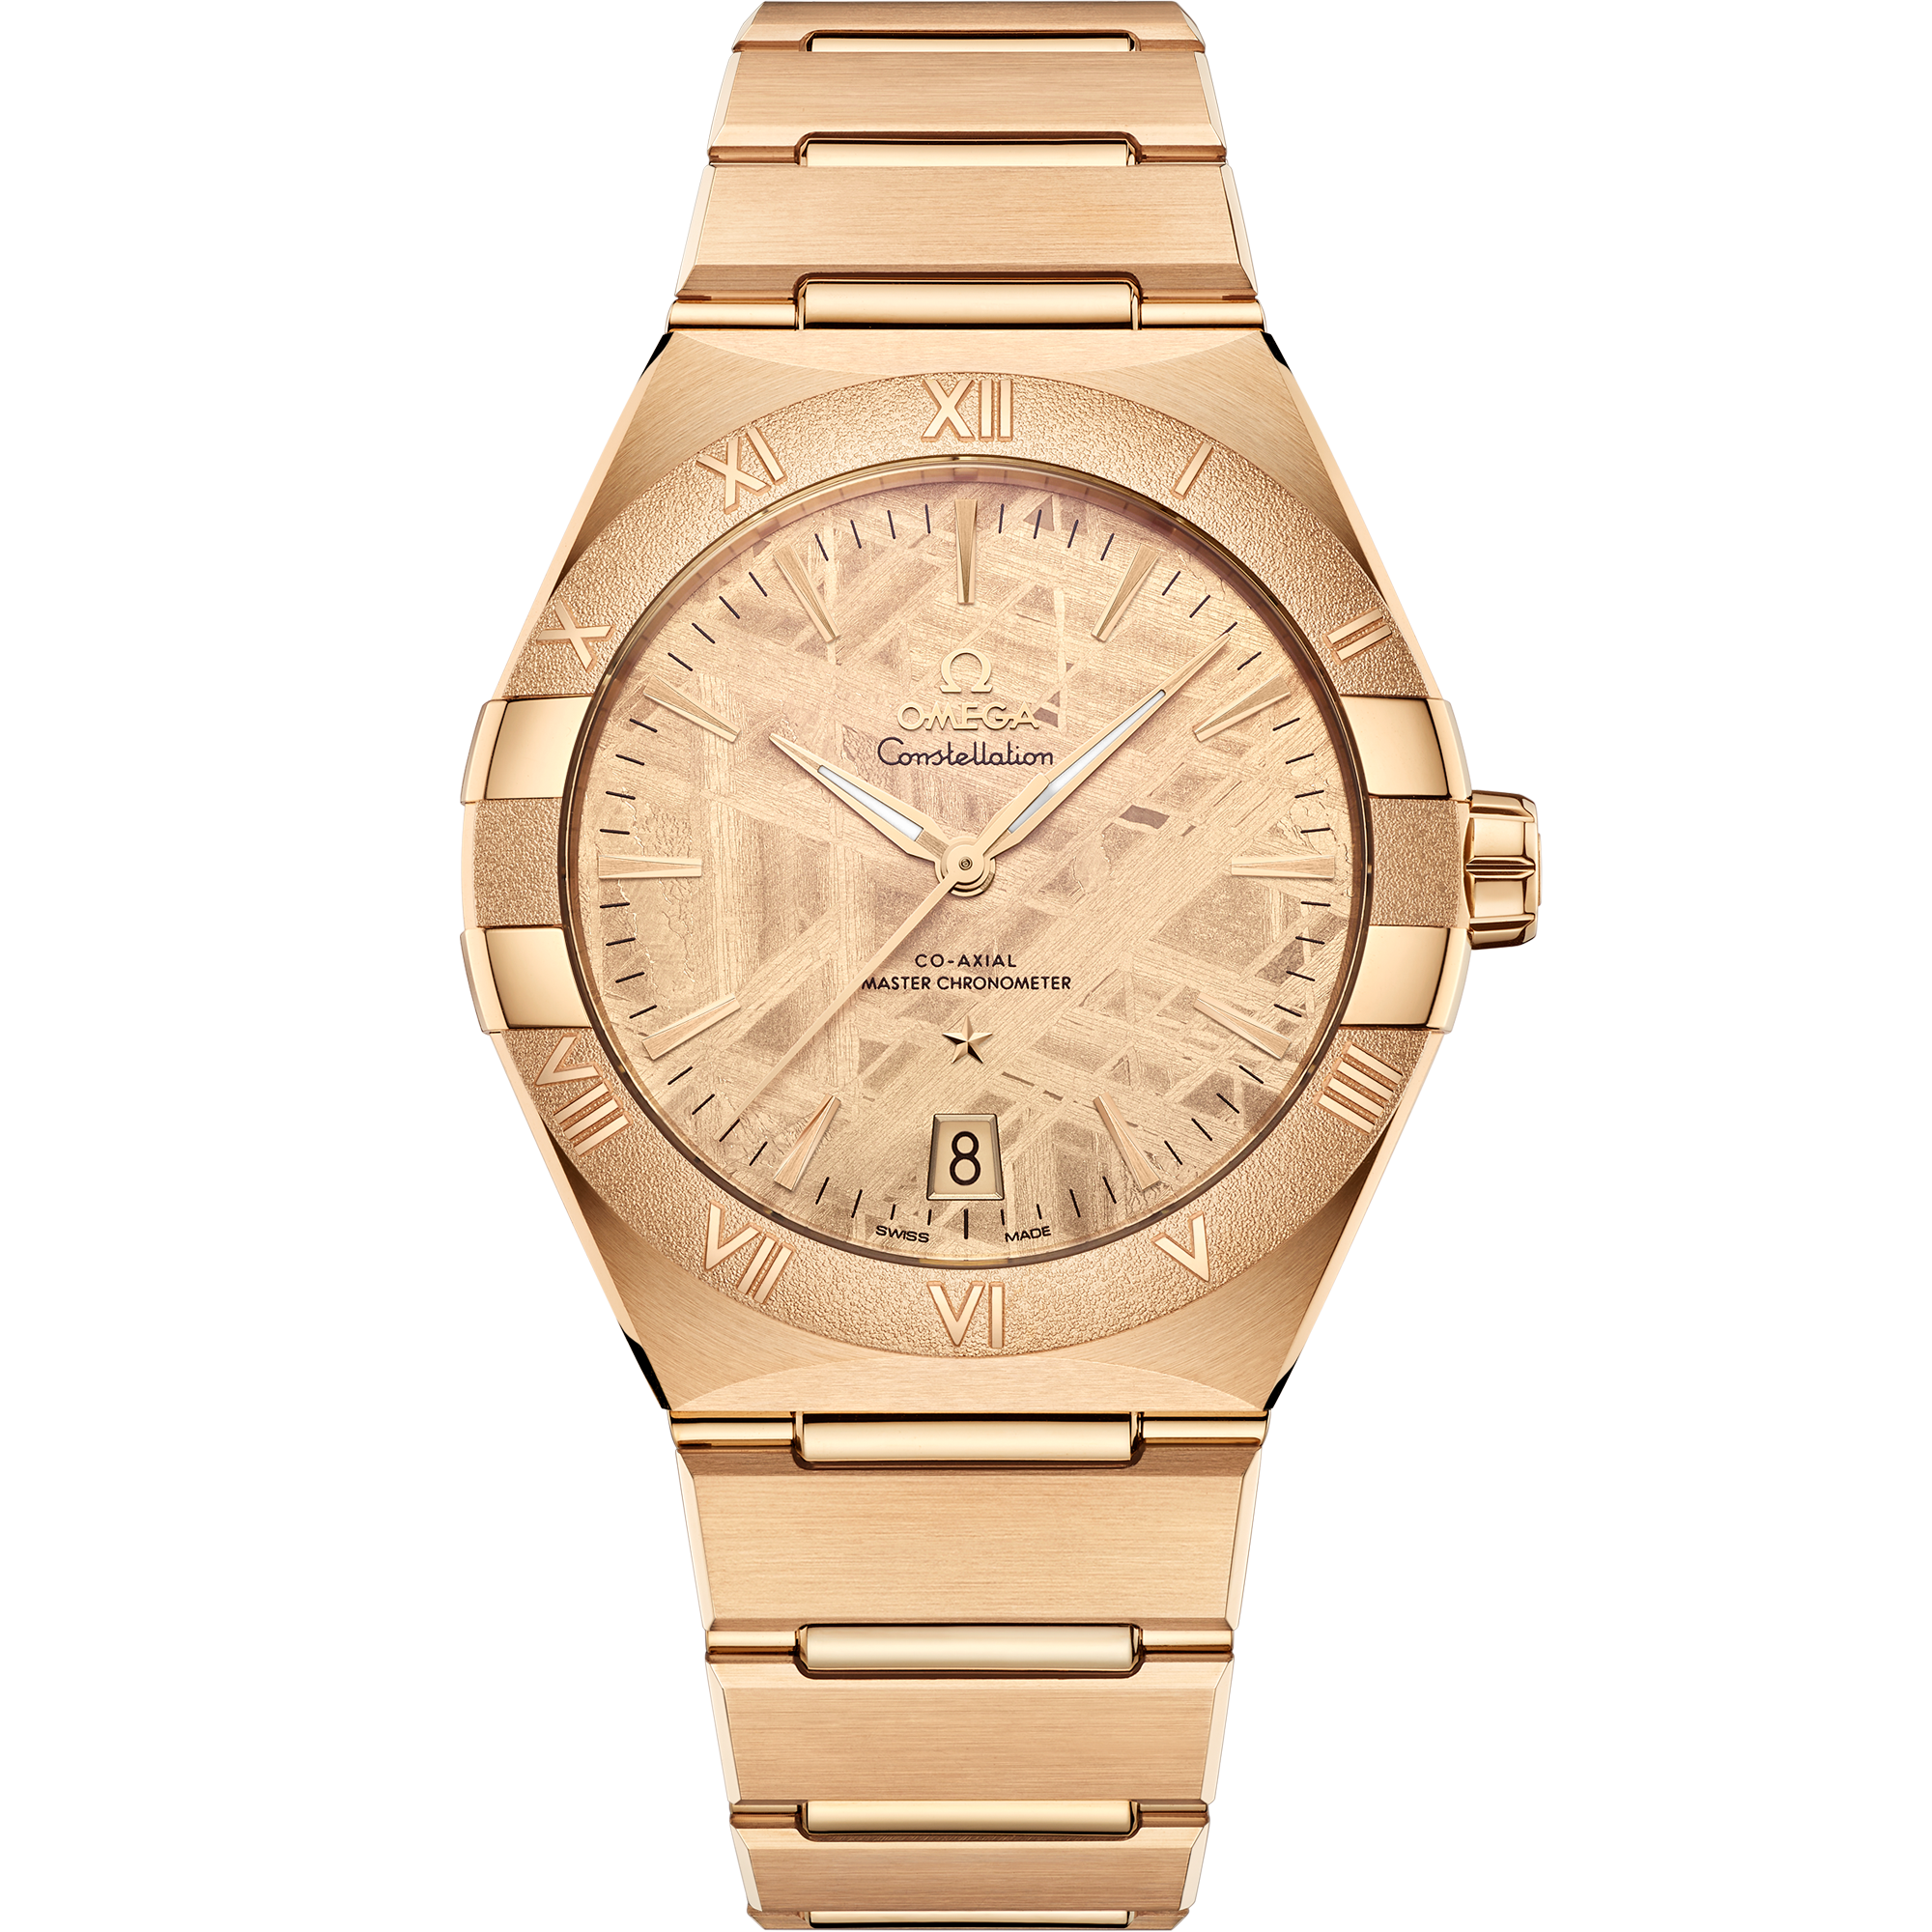 OMEGA Constellation Constellation: All Watches | OMEGA US®